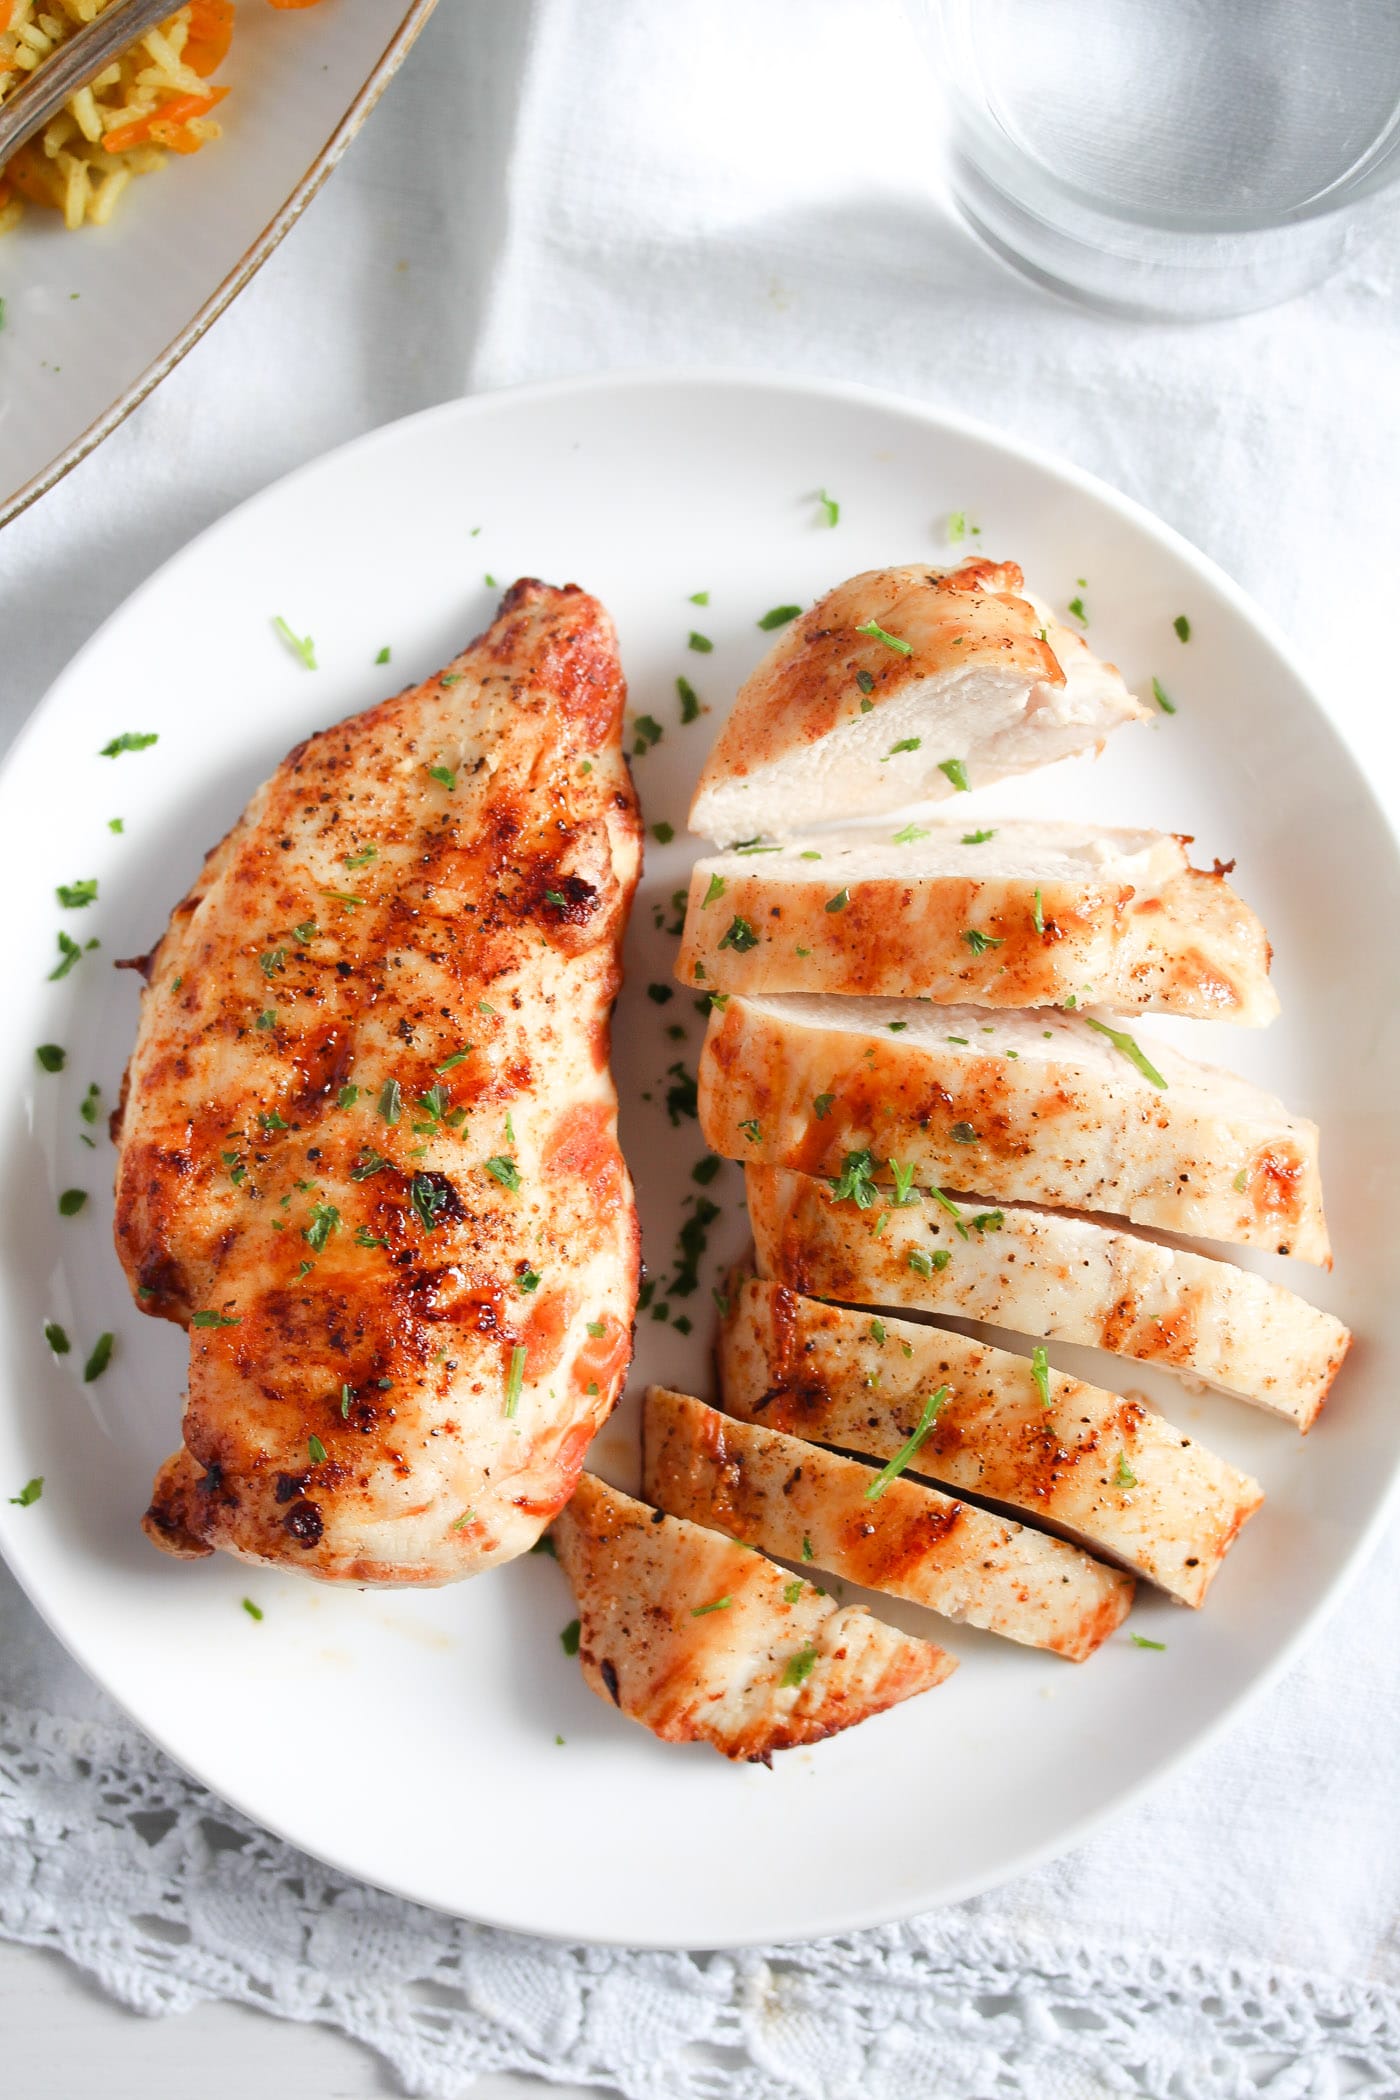 juicy chicken cooked in the air fryer from frozen